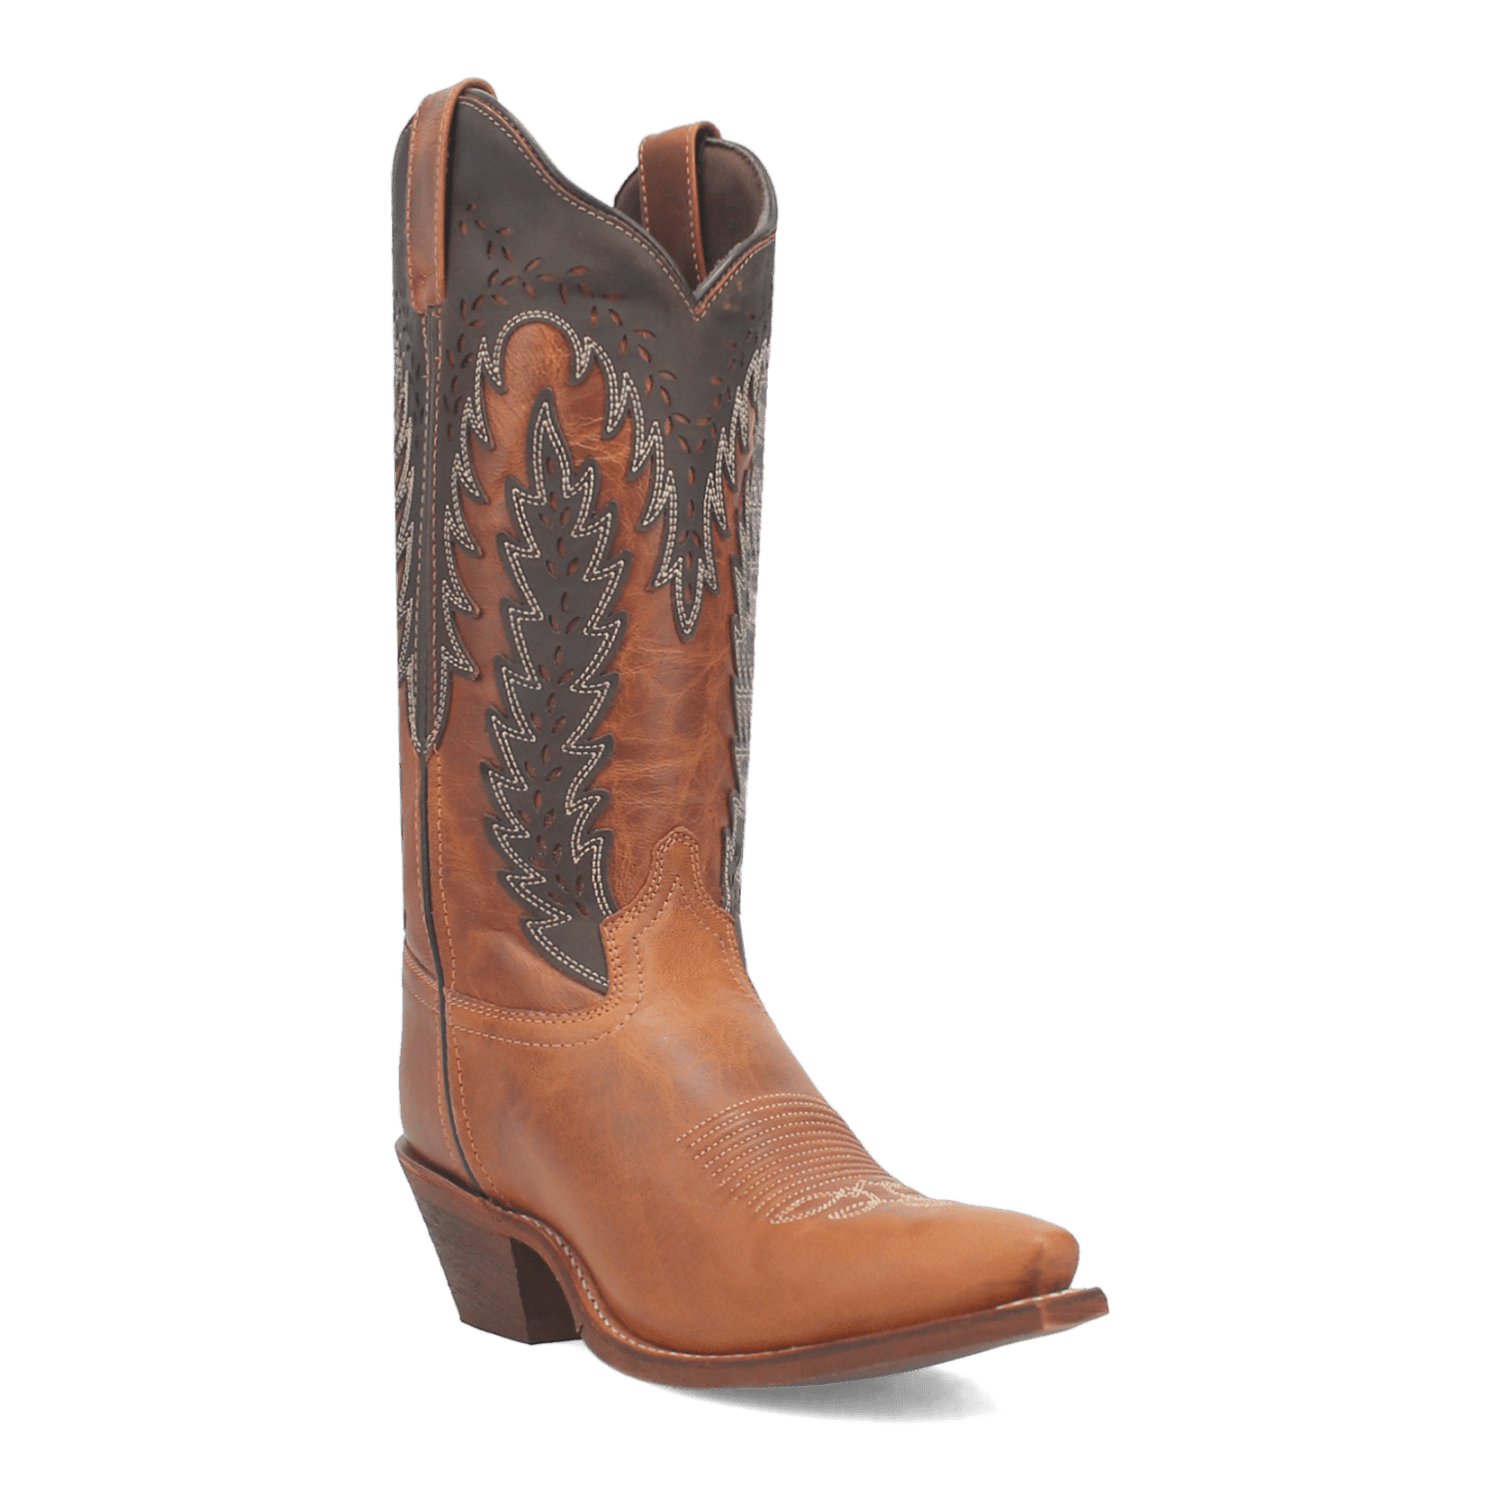 FARAH LEATHER BOOT Cover